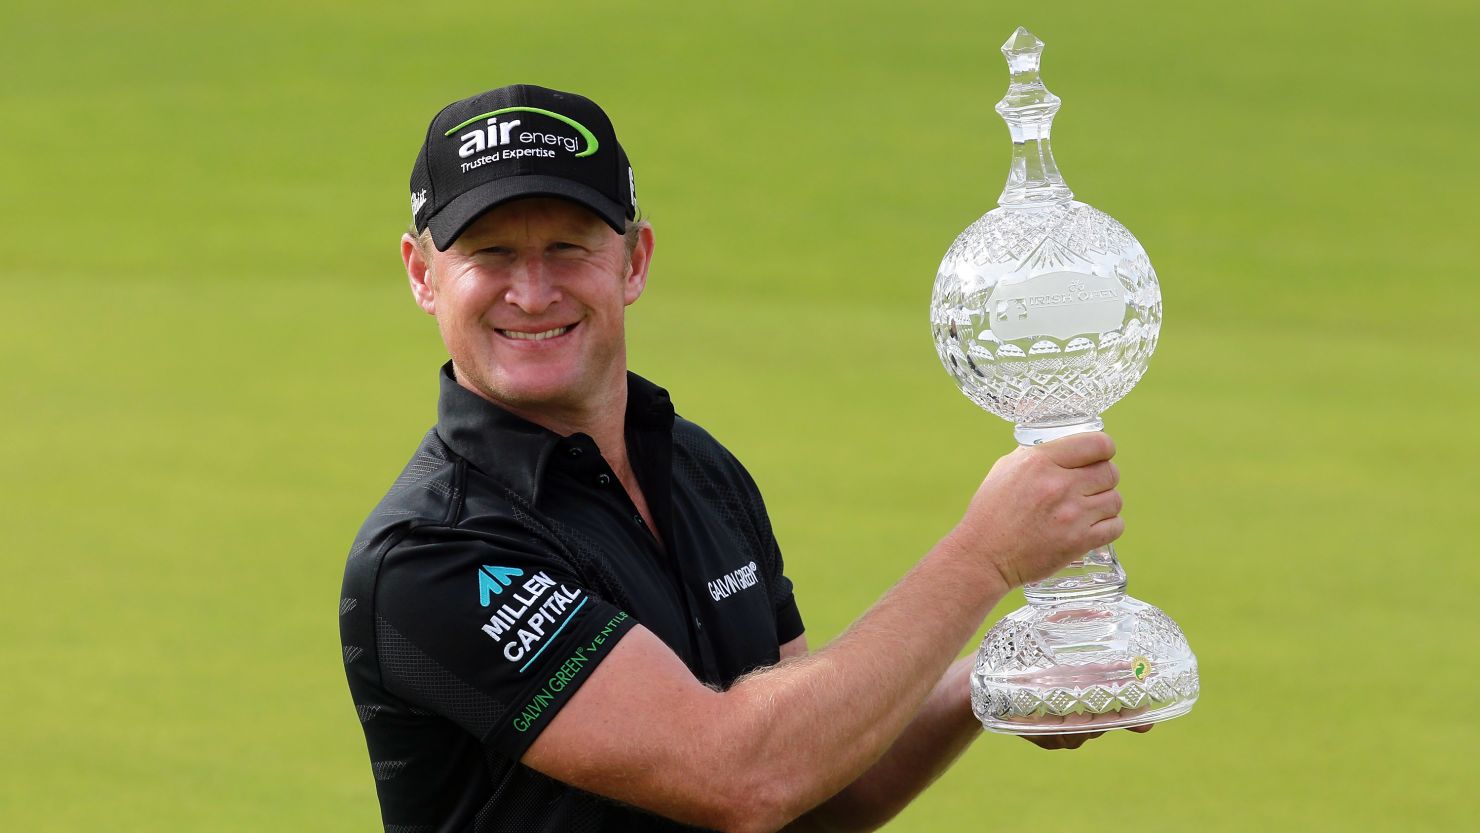 Jamie Donaldson won his first European Tour event at the 255th attempt on Sunday winning the Irish Open at Royal Portrush